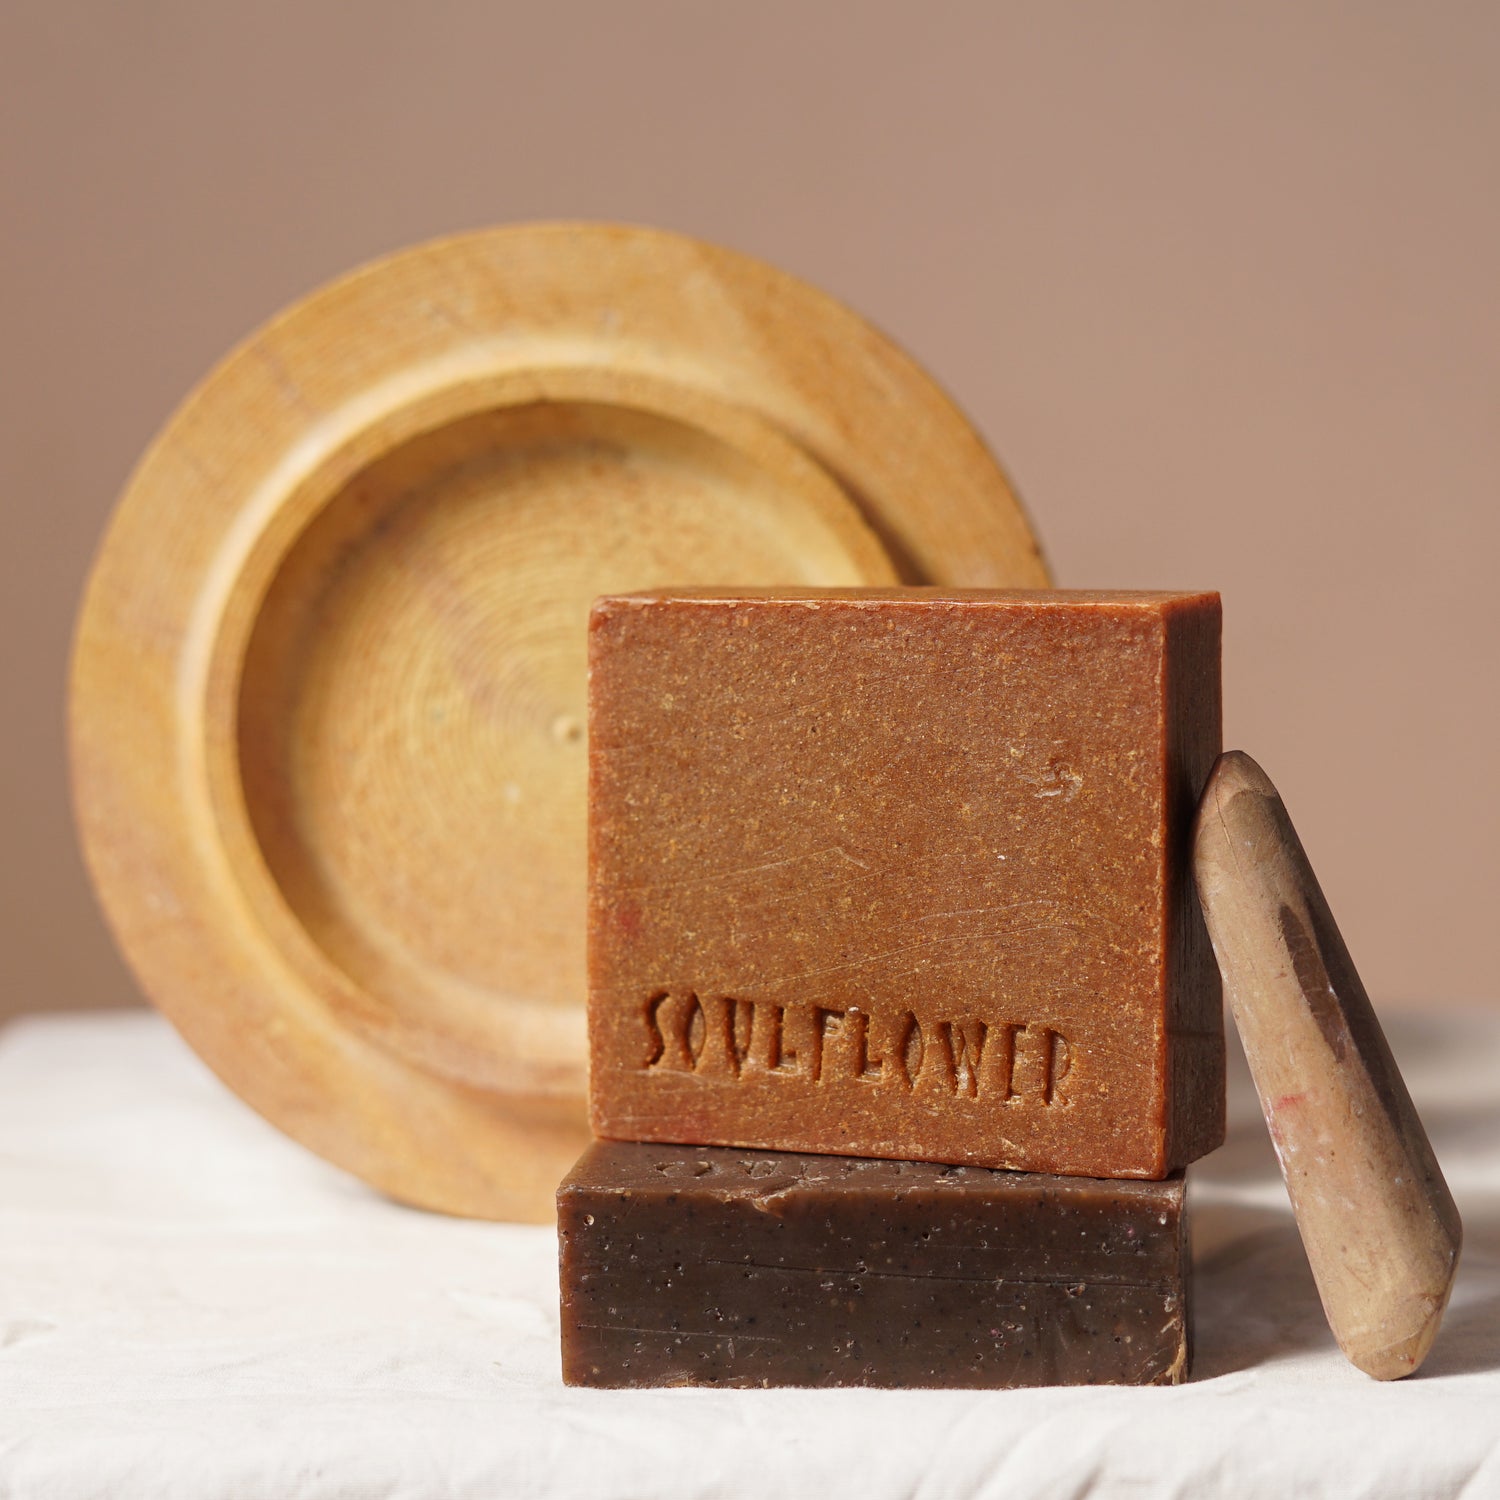 Sandalwood Soap: The Anti-Aging Secret You've Been Looking For